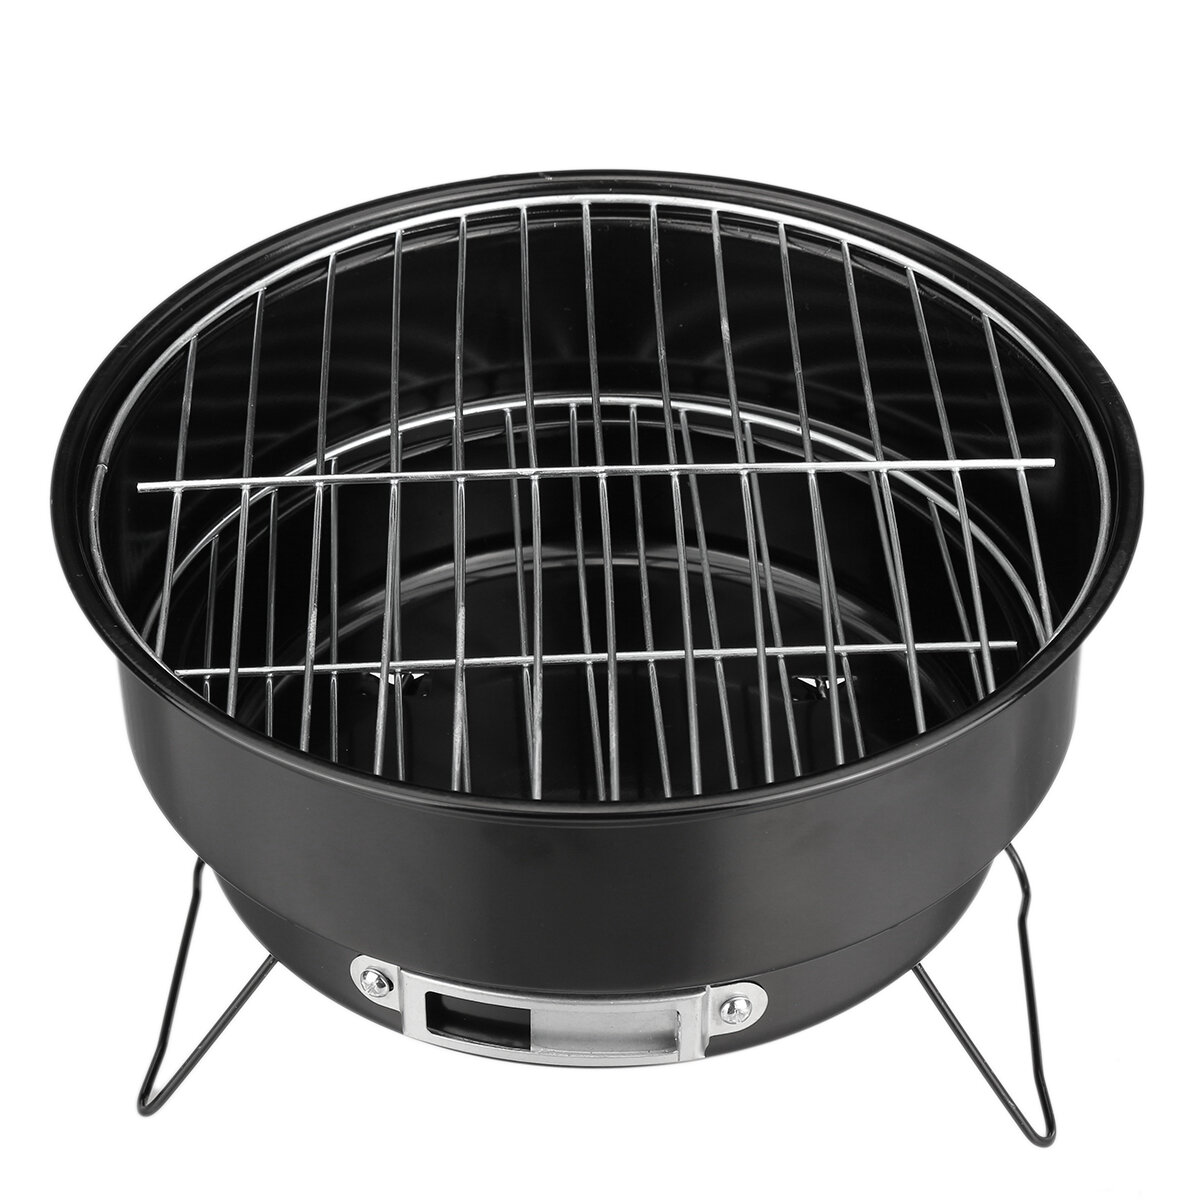 Round Barbecue Grill Foldable Stainless Steel Grill Portable Outdoor Camping Barbecue Grill